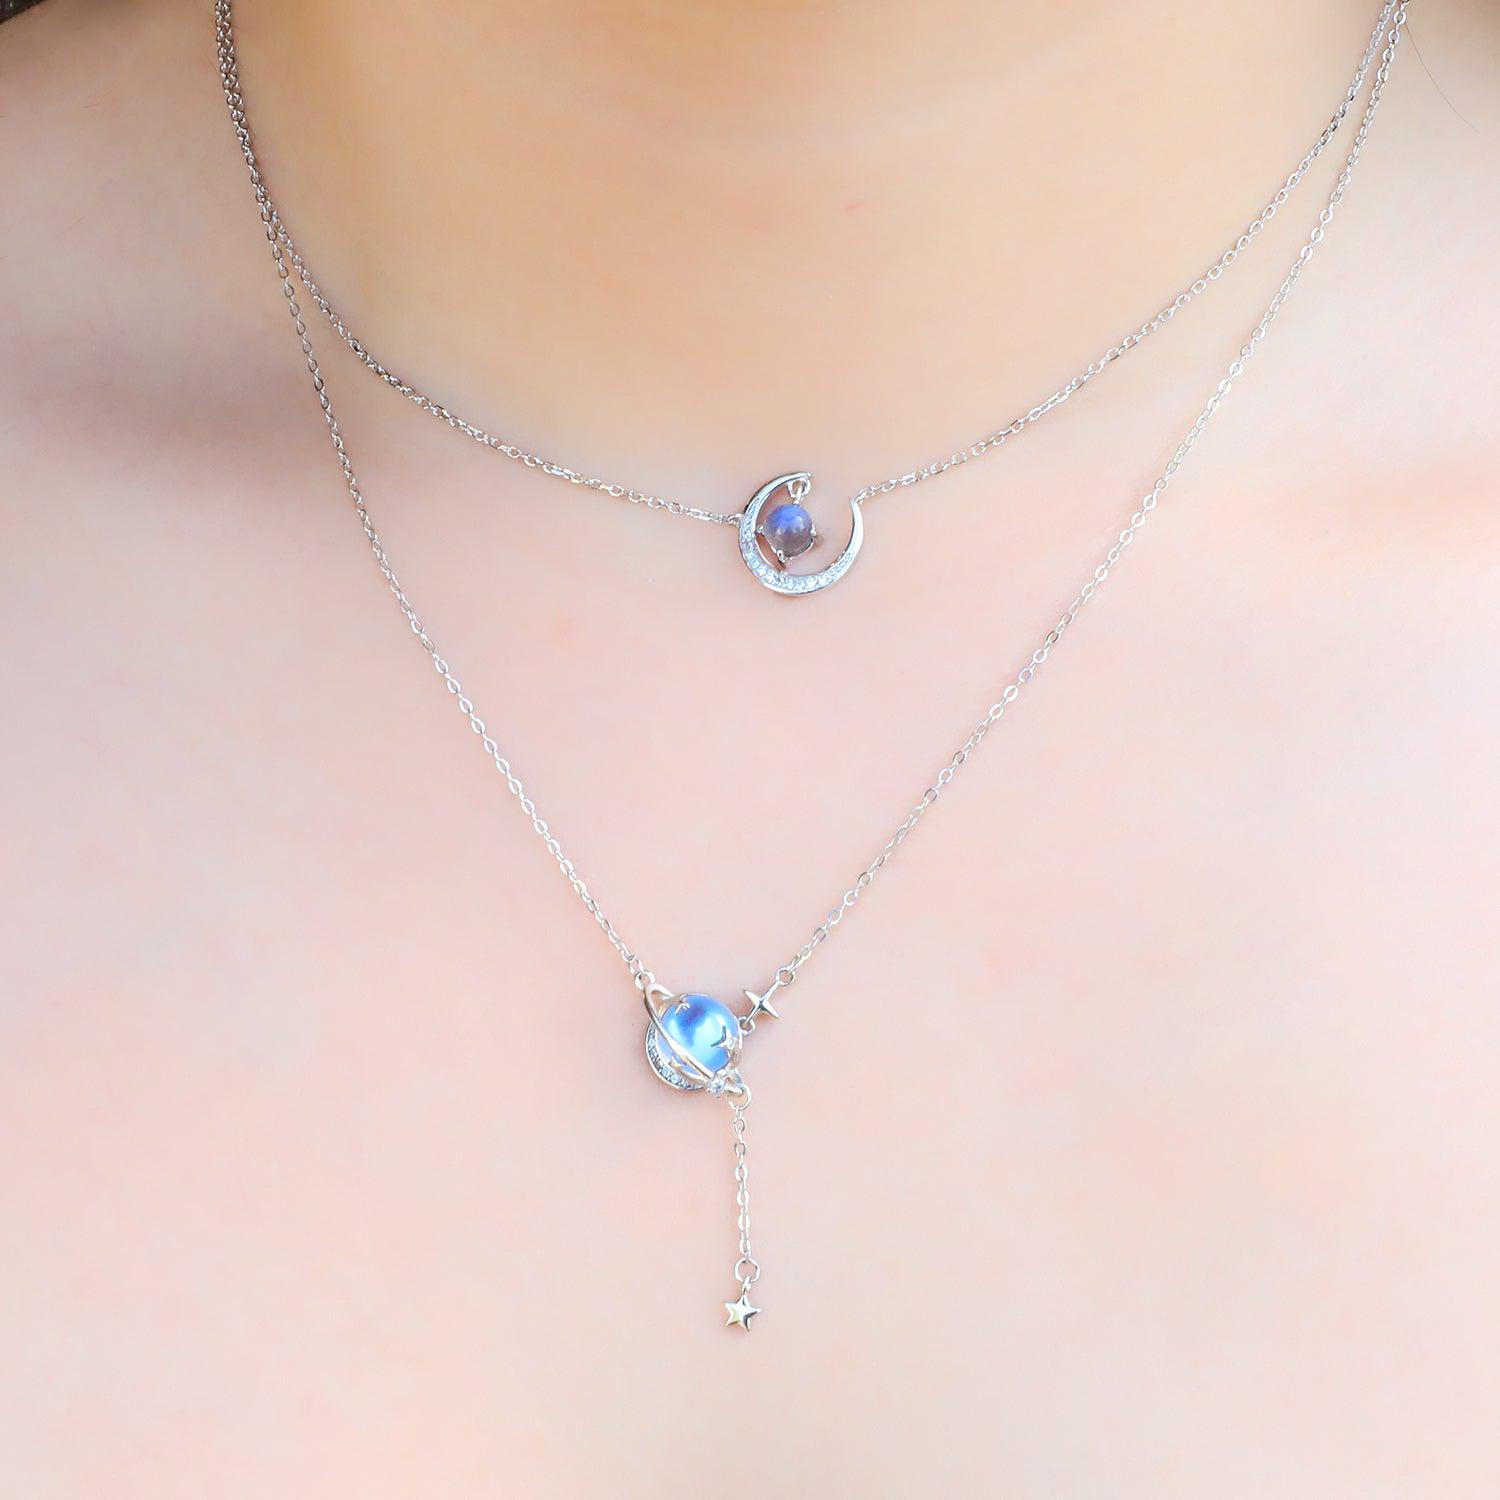 Dangling Planet Necklace